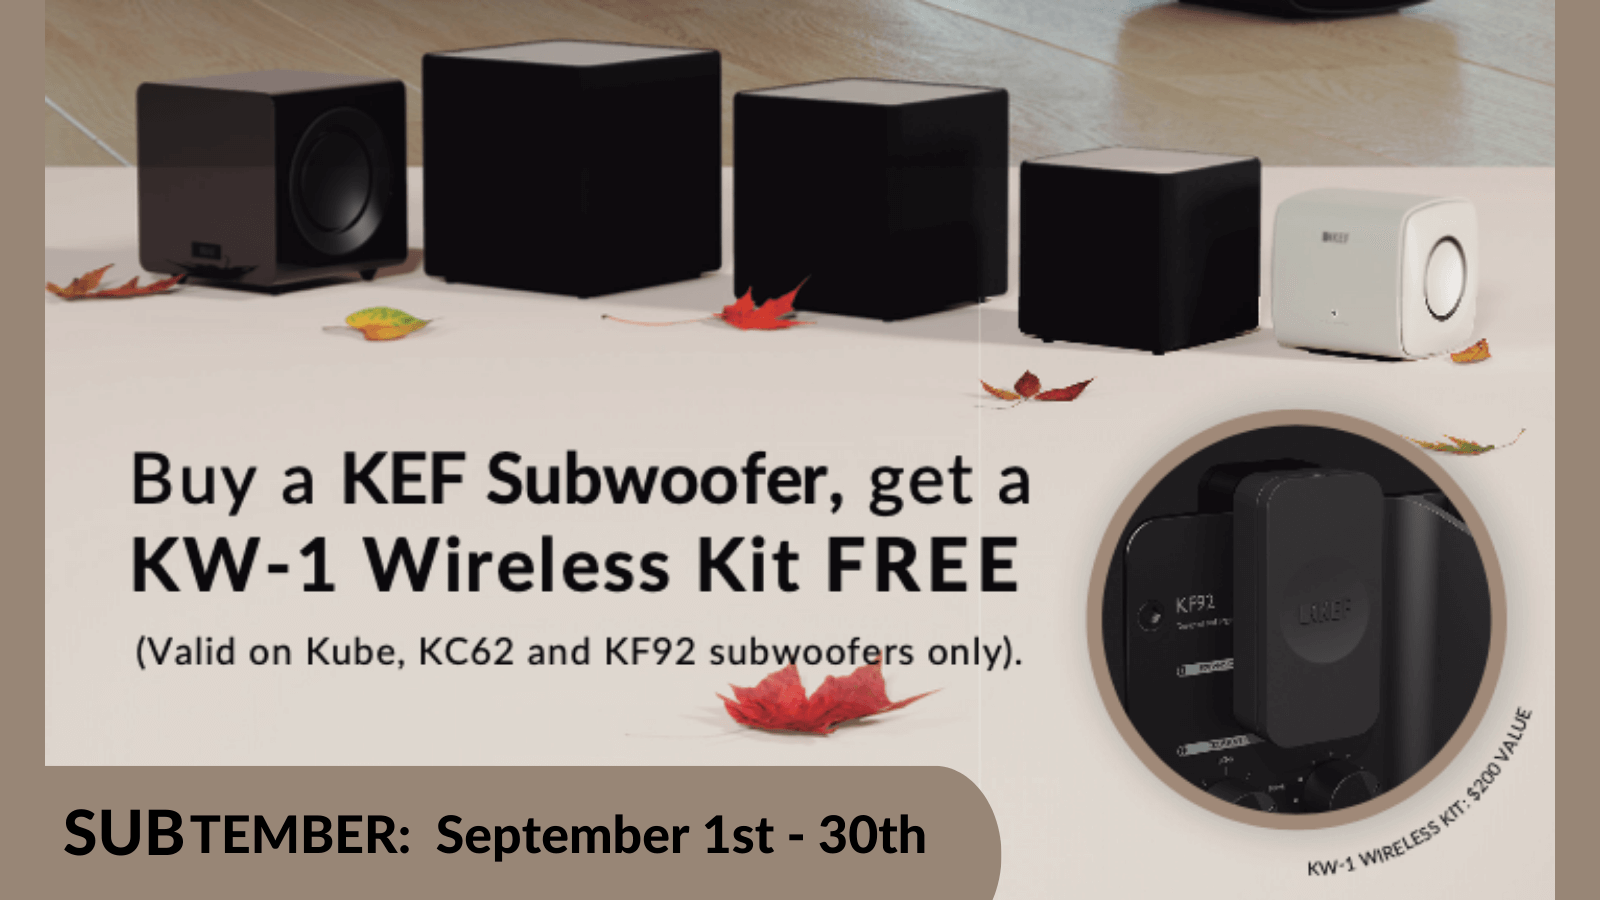 Buy a KEF Subwoofer, Get a KW-1 Wireless Kit FREE